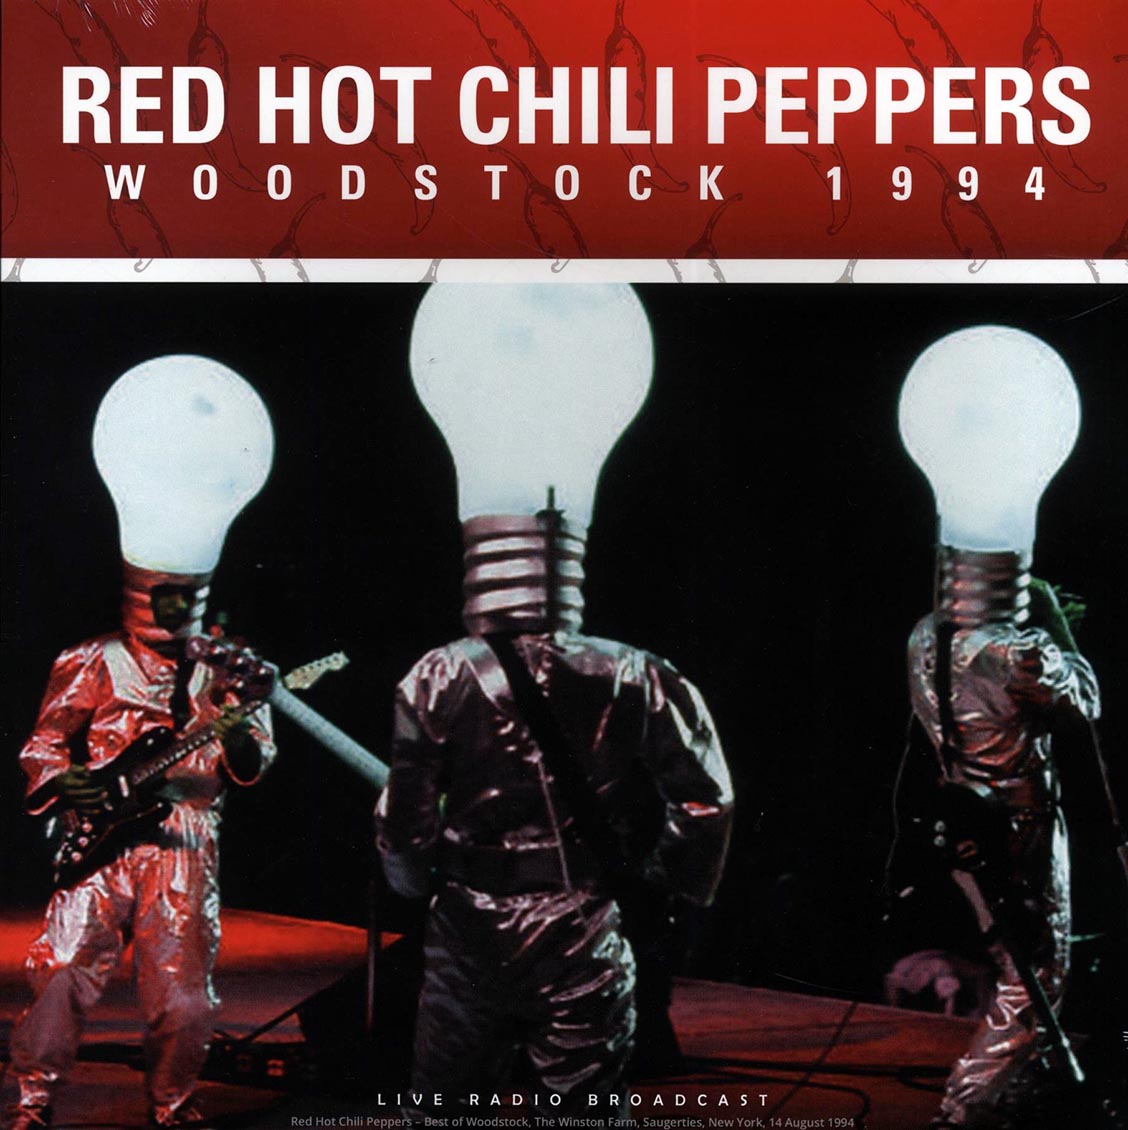 Red Hot Chili Peppers - Best Of Woodstock 1994: The Winston Farm, Saugerties, NY, August 14th - Vinyl LP